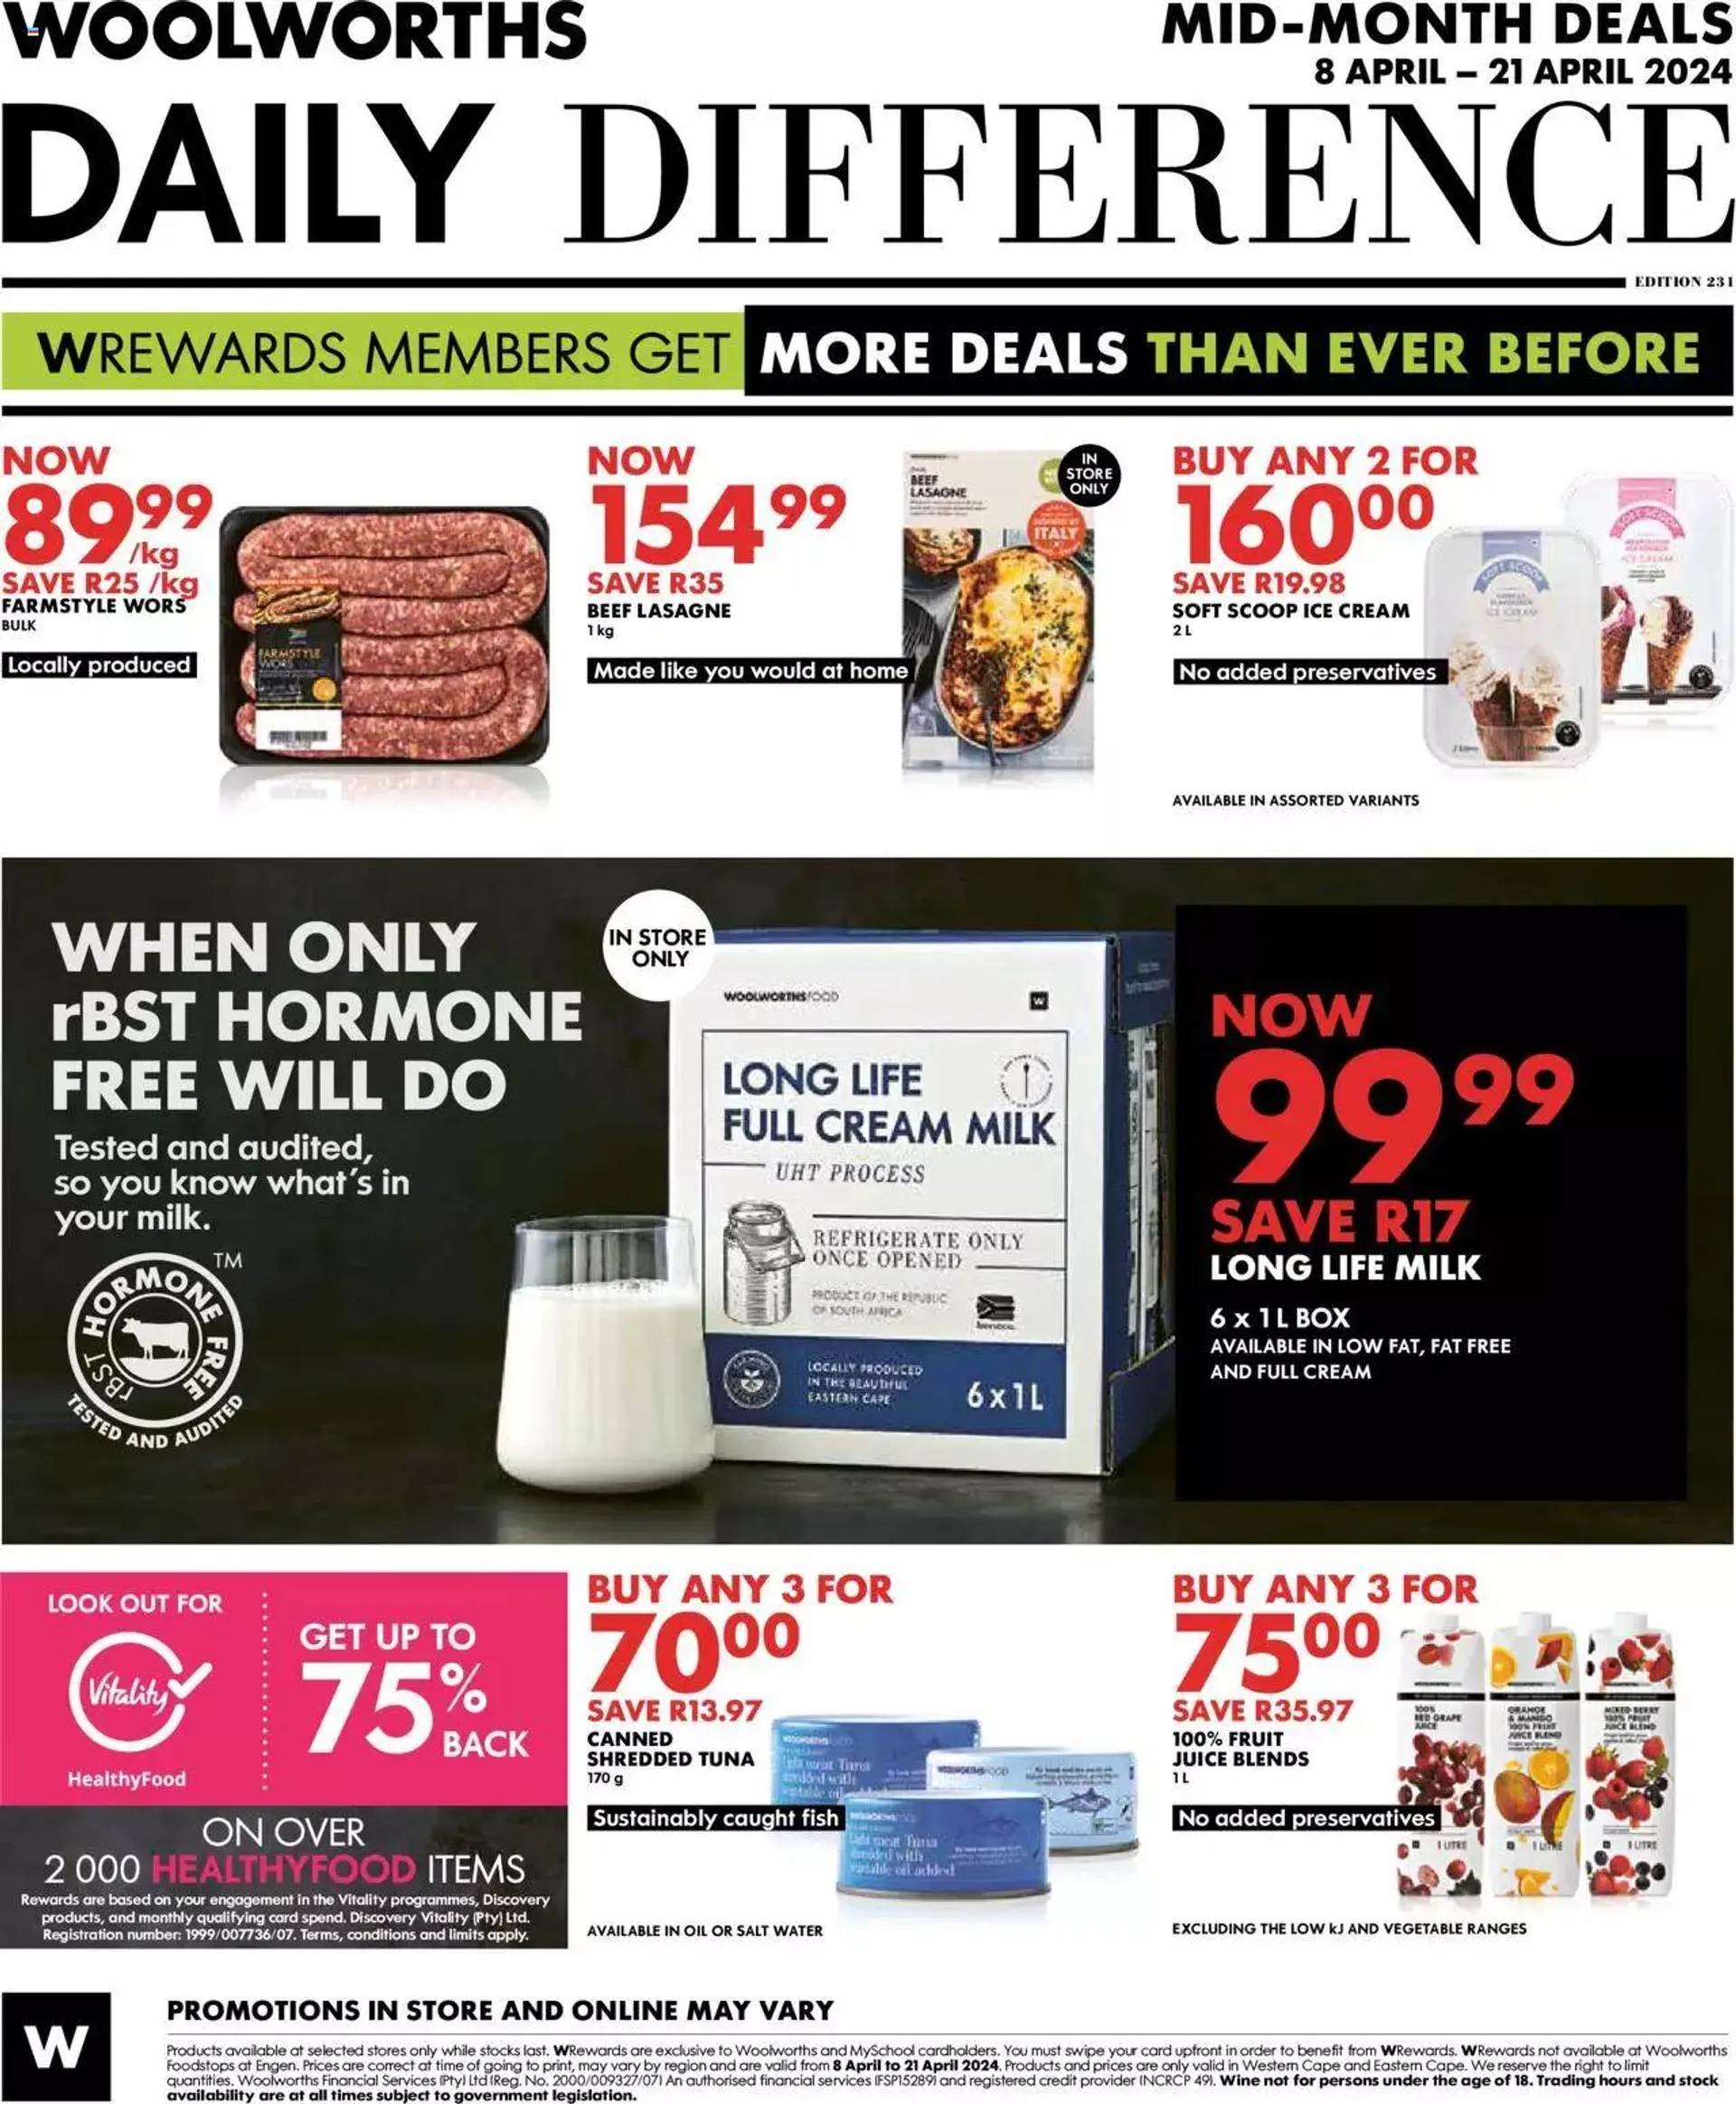 Woolworths Daily Difference - Western Cape - 7